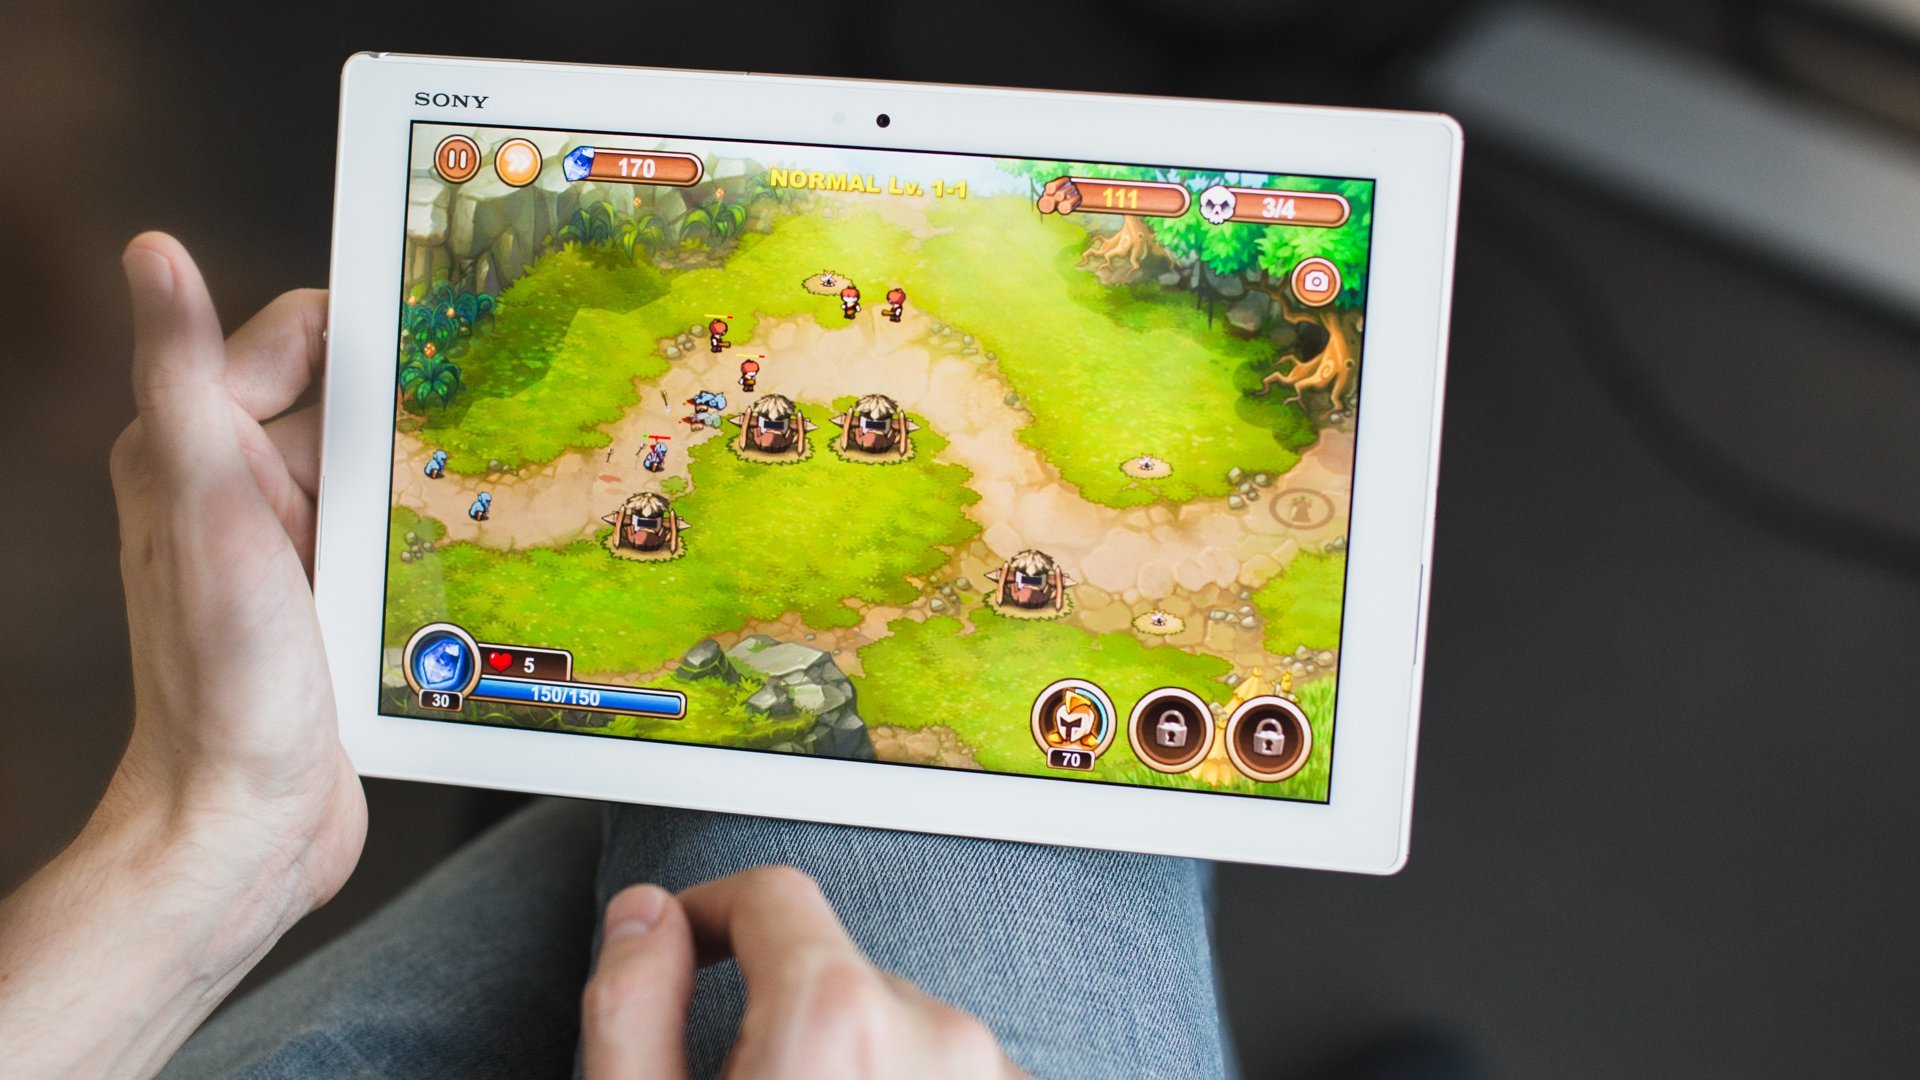 Is Tablet Or Phone Better For Playing Games